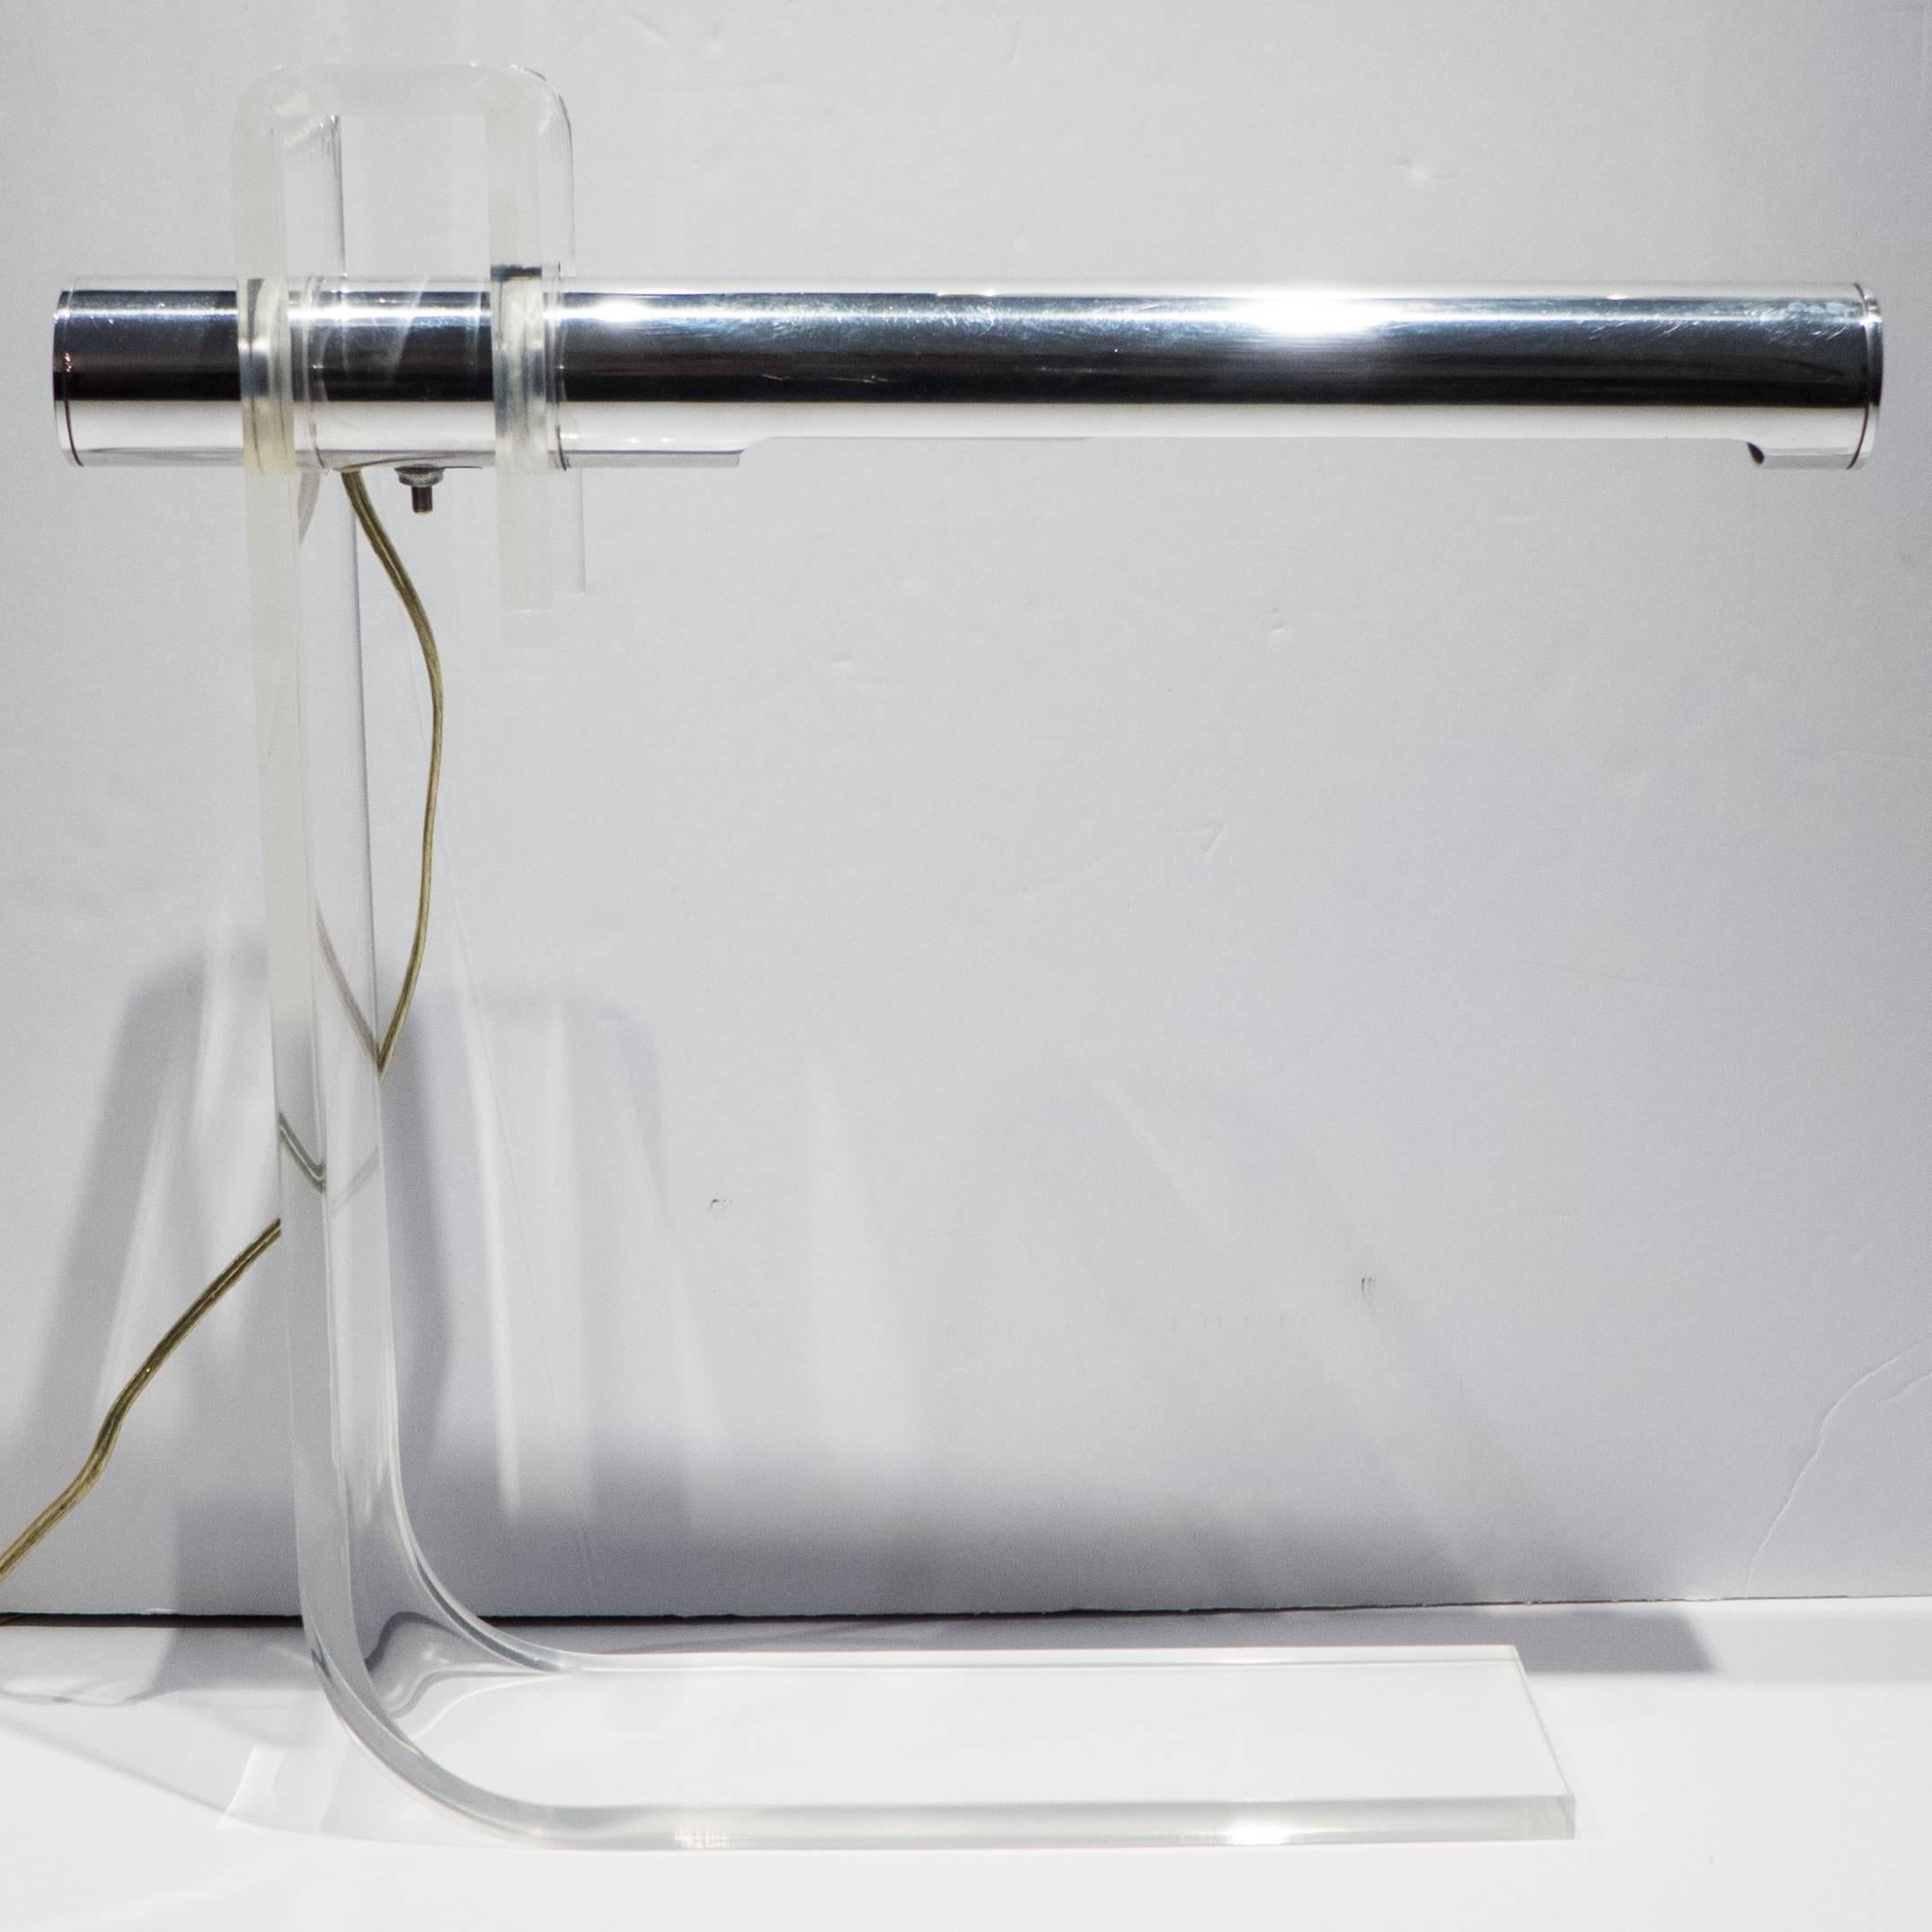 Table lamp of clear acrylic with a pivoting tubular aluminum visor. A spare and stylish, circa 1970 design produced by Robert Sonneman. In excellent condition with no chips, cracks, or discoloration to the acrylic and only very minor wear overall